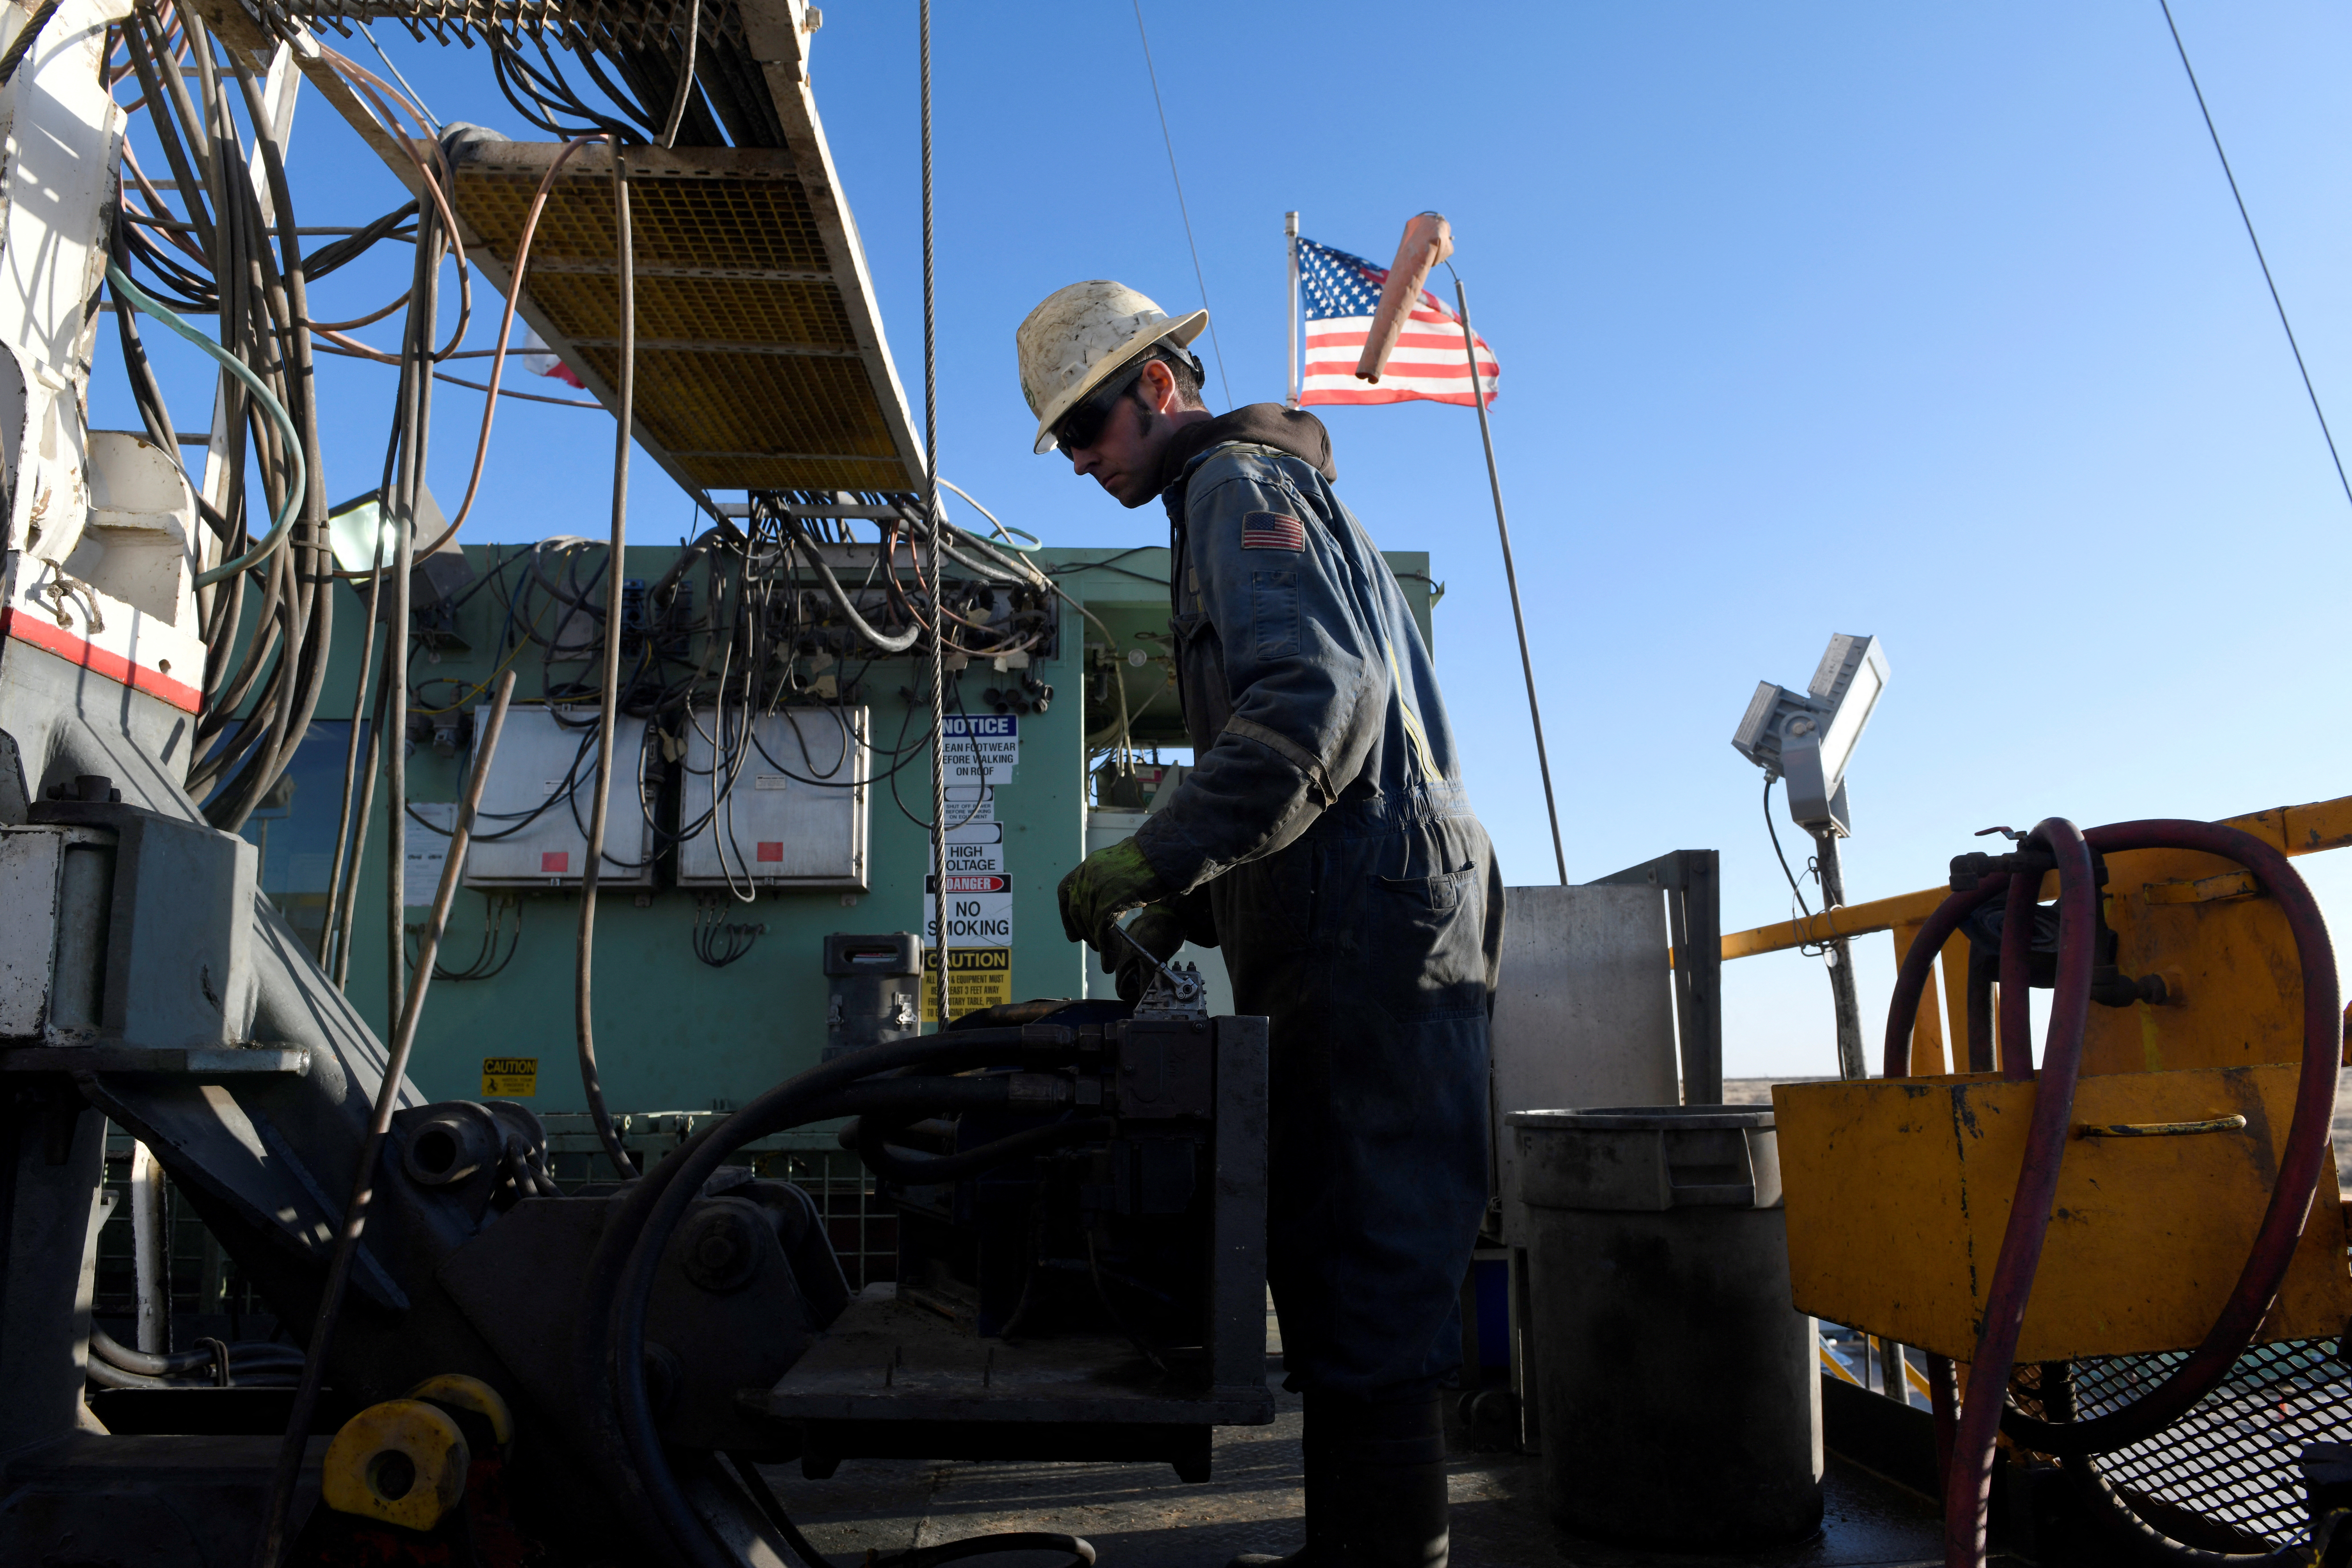 A worker operates equipment on a drilling rig near Midland